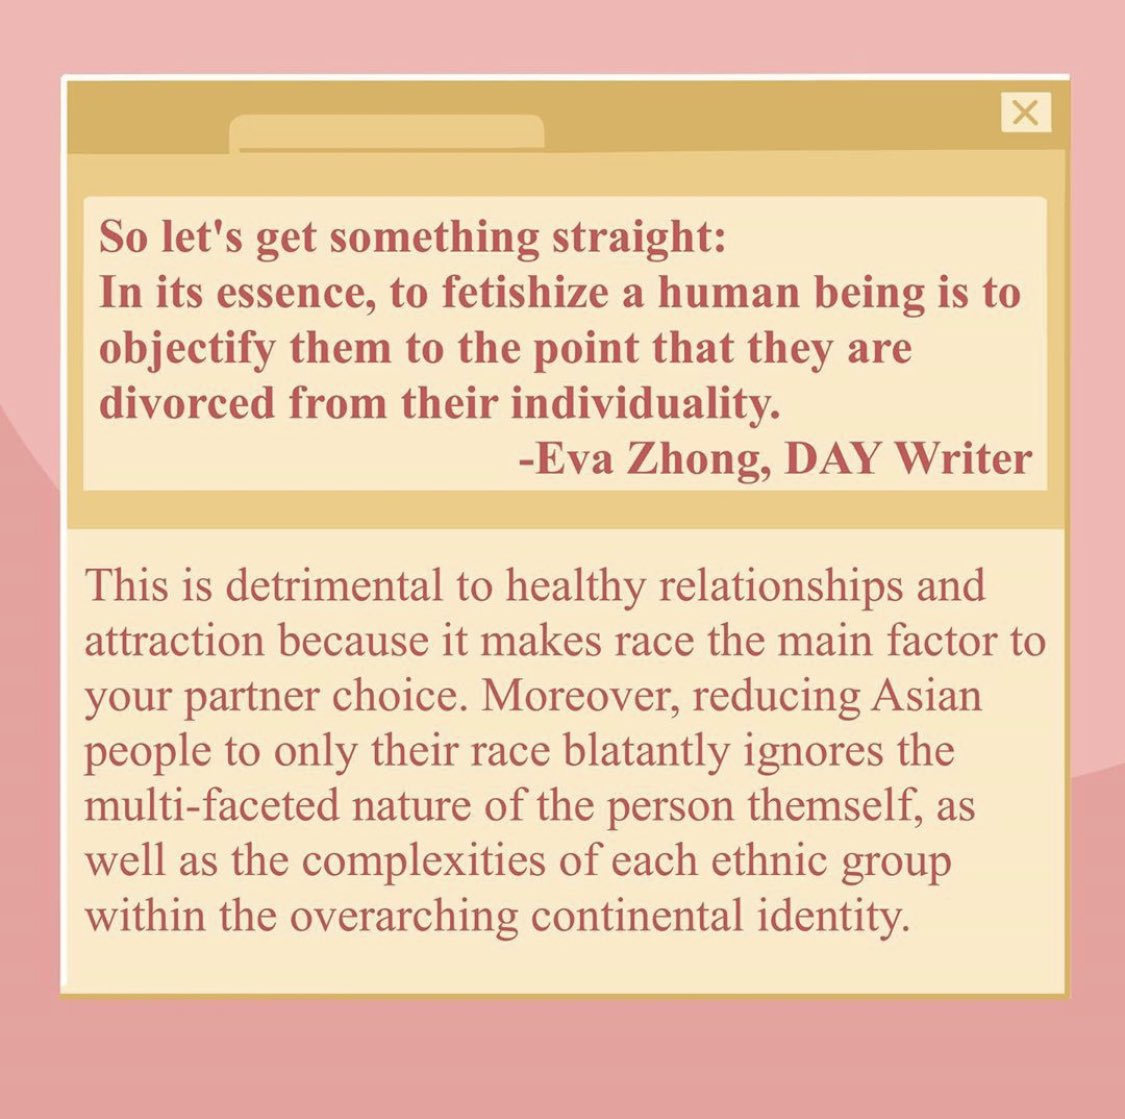 STOP FETISHIZING ASIANS & OUR CULTURE! Read this thread. cr: IG-dearasianyouth